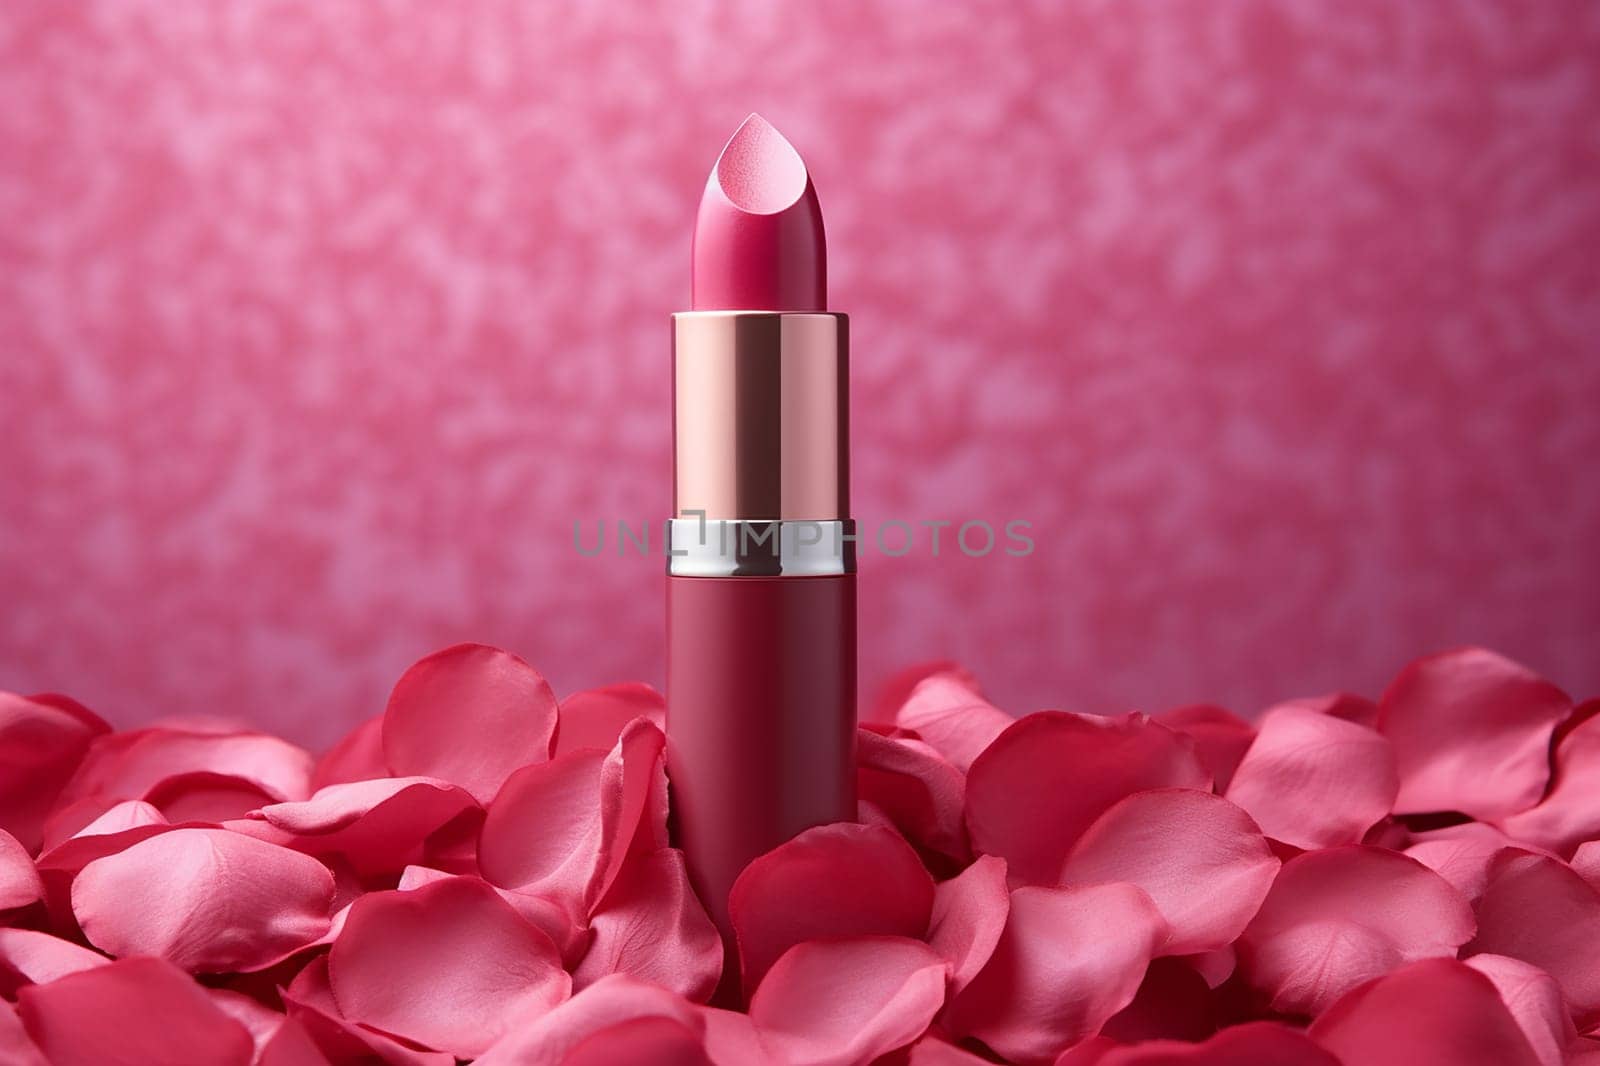 Close-up of a lipstick on a bed of rose petals.